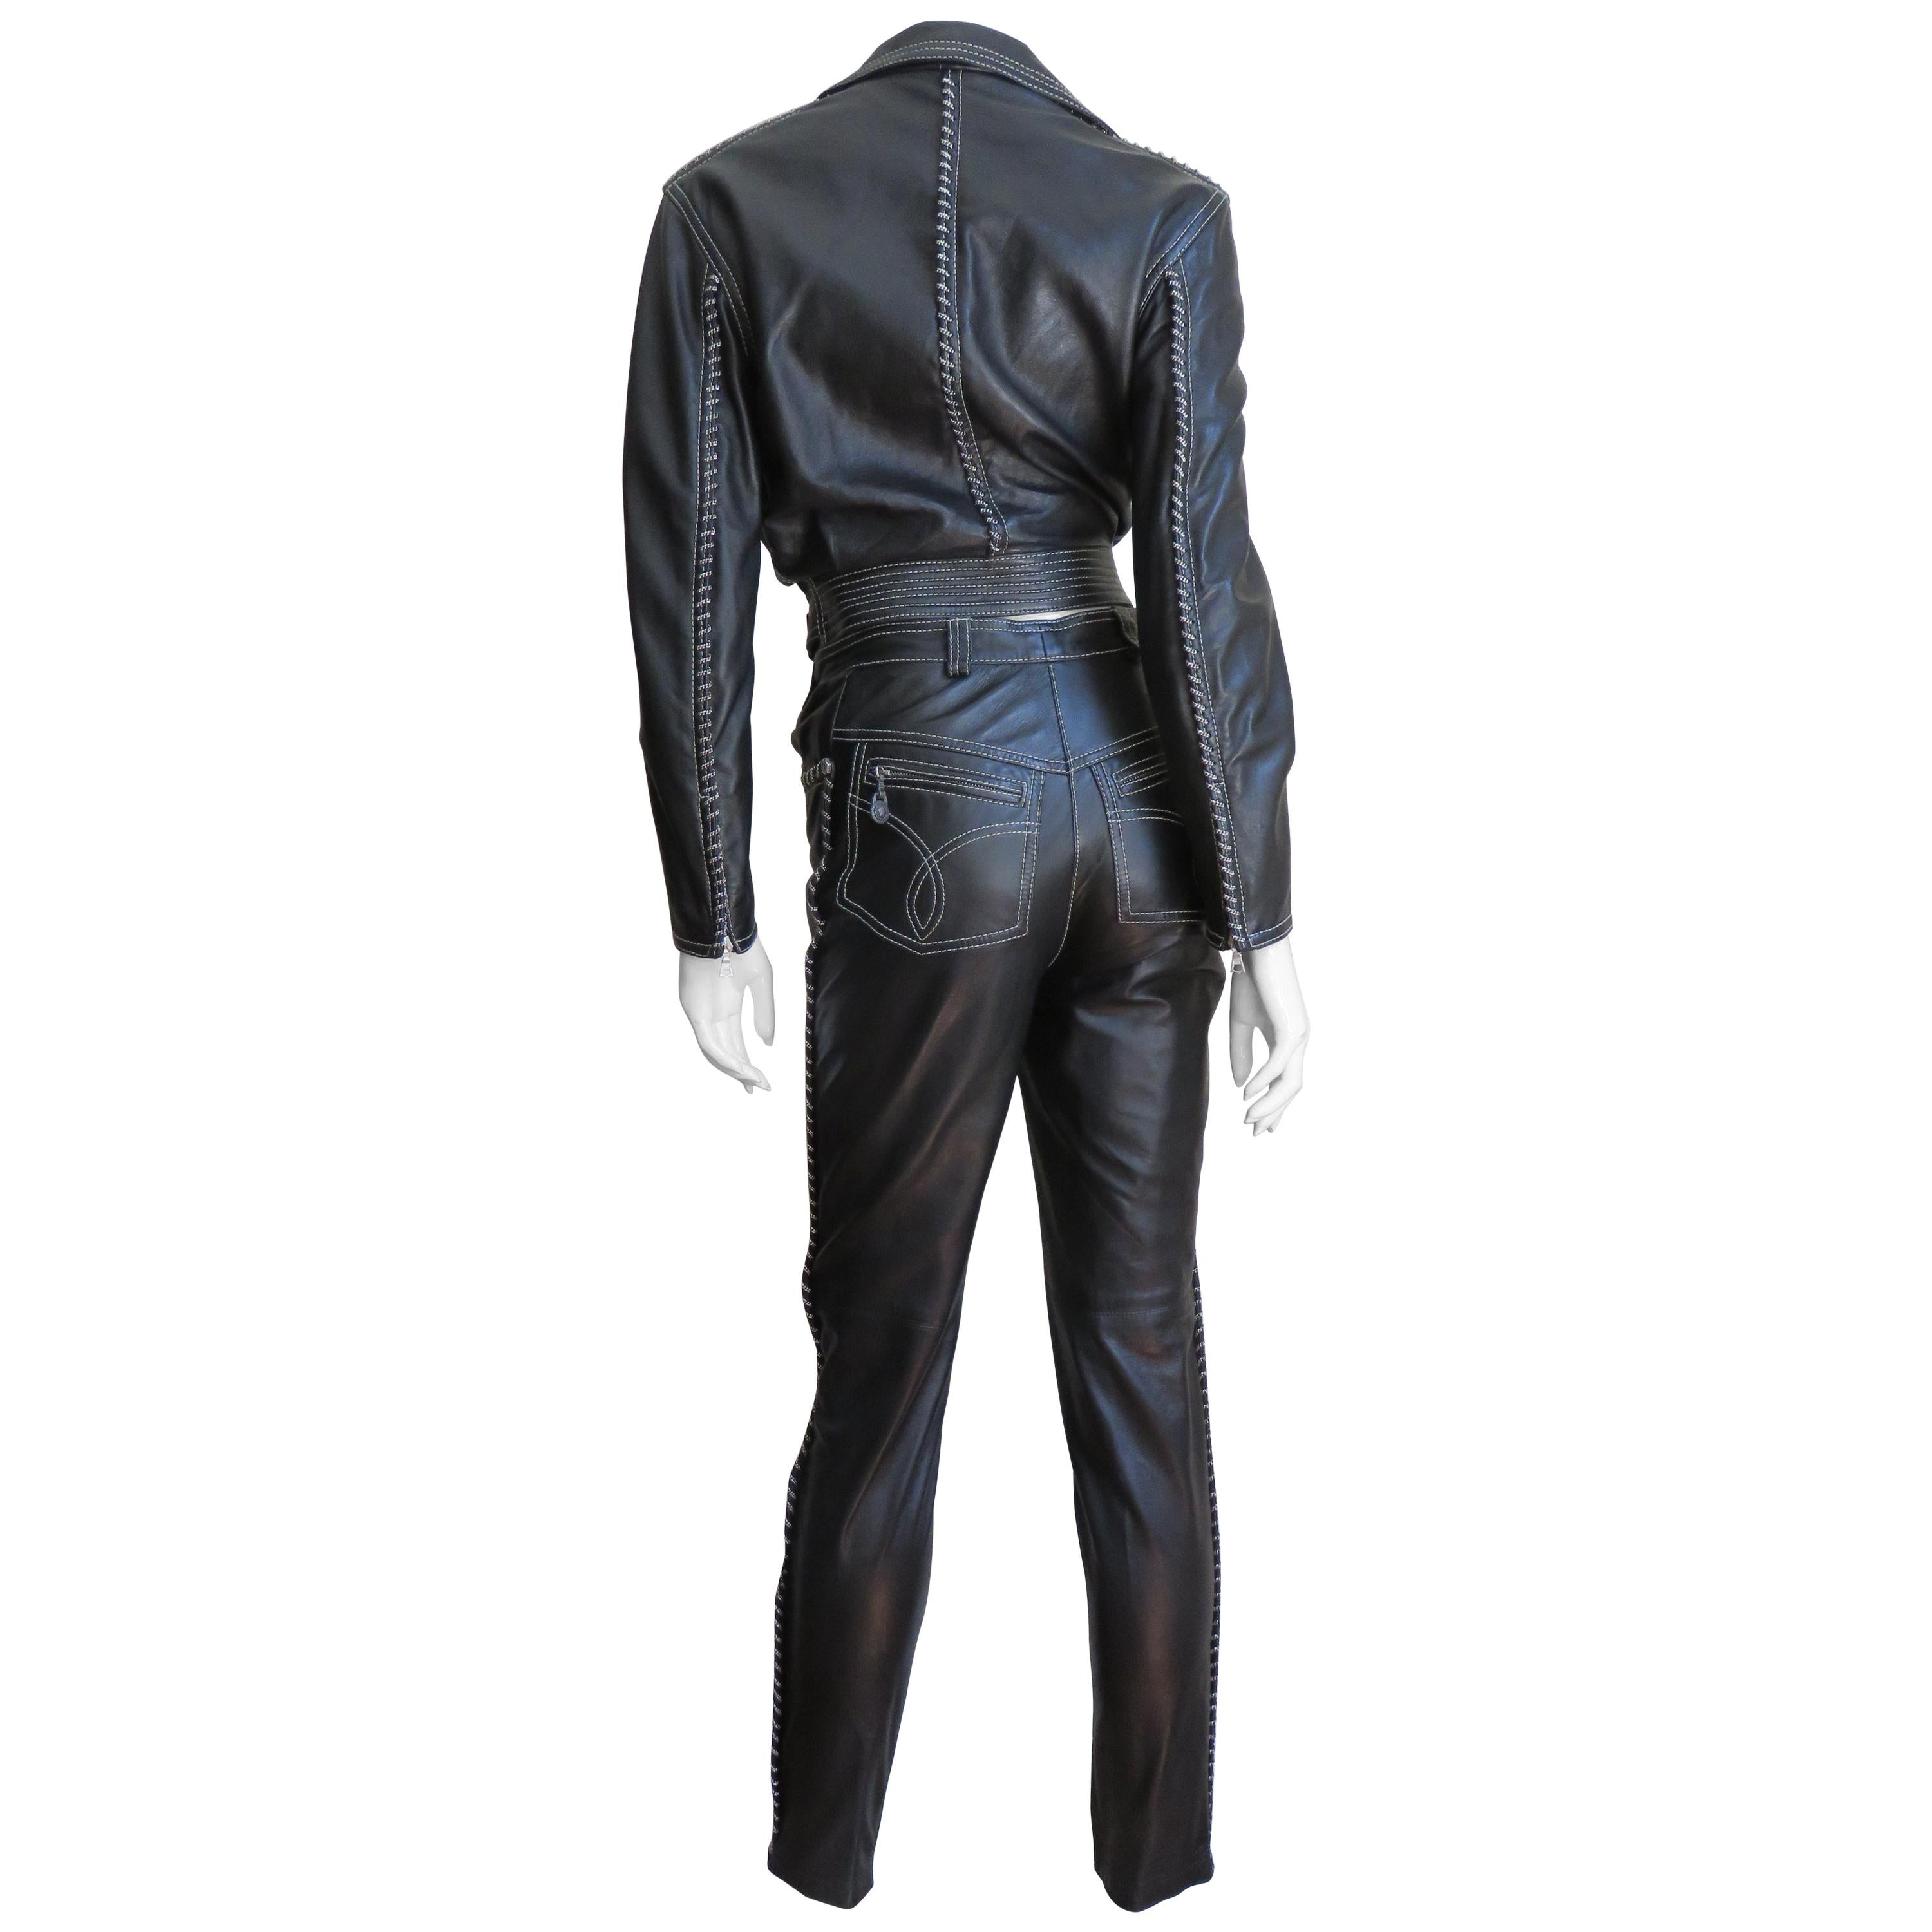 A fabulous 2 piece supple black leather motorcycle jacket and pant set from Gianni Versace's A/W 1992 Collection. The jacket is motorcycle style with a lapel collar, zipper front closure, 3 zipper welt pockets, zipper wrists and an adjustable belt